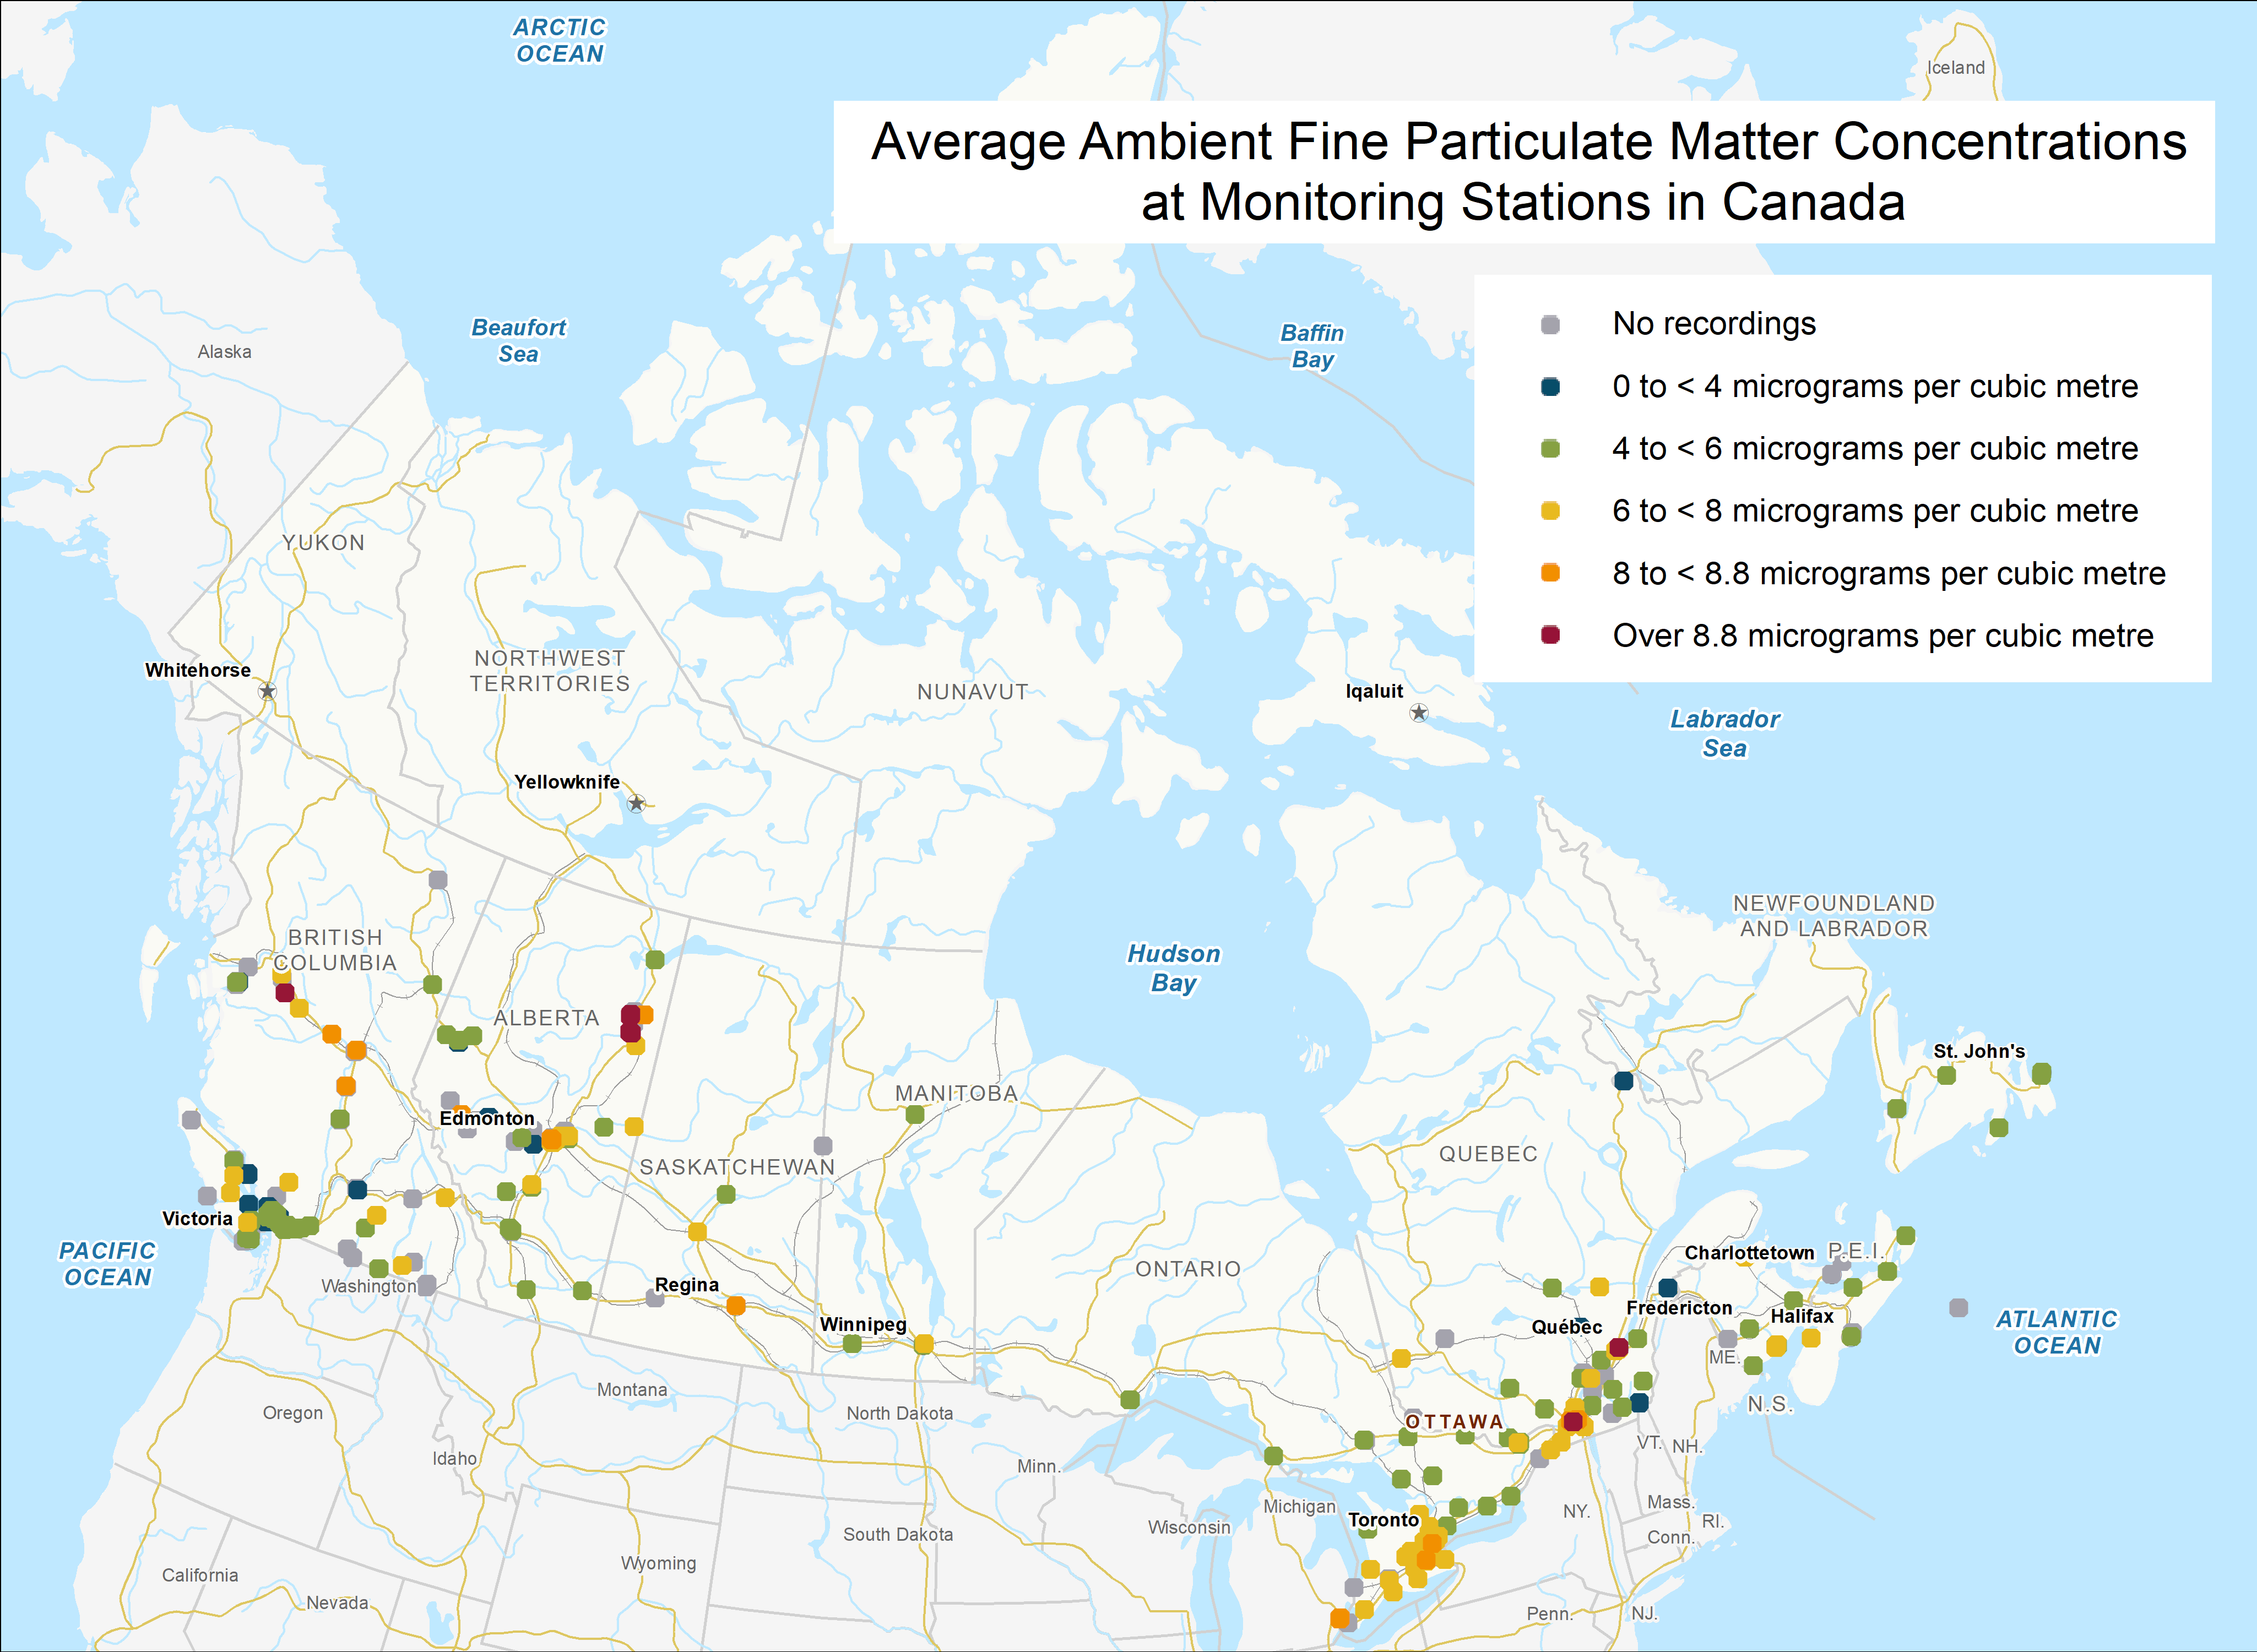 Map Showing Average Ambient Fine Particulate Matter Concentrations at Monitoring Stations in Canada